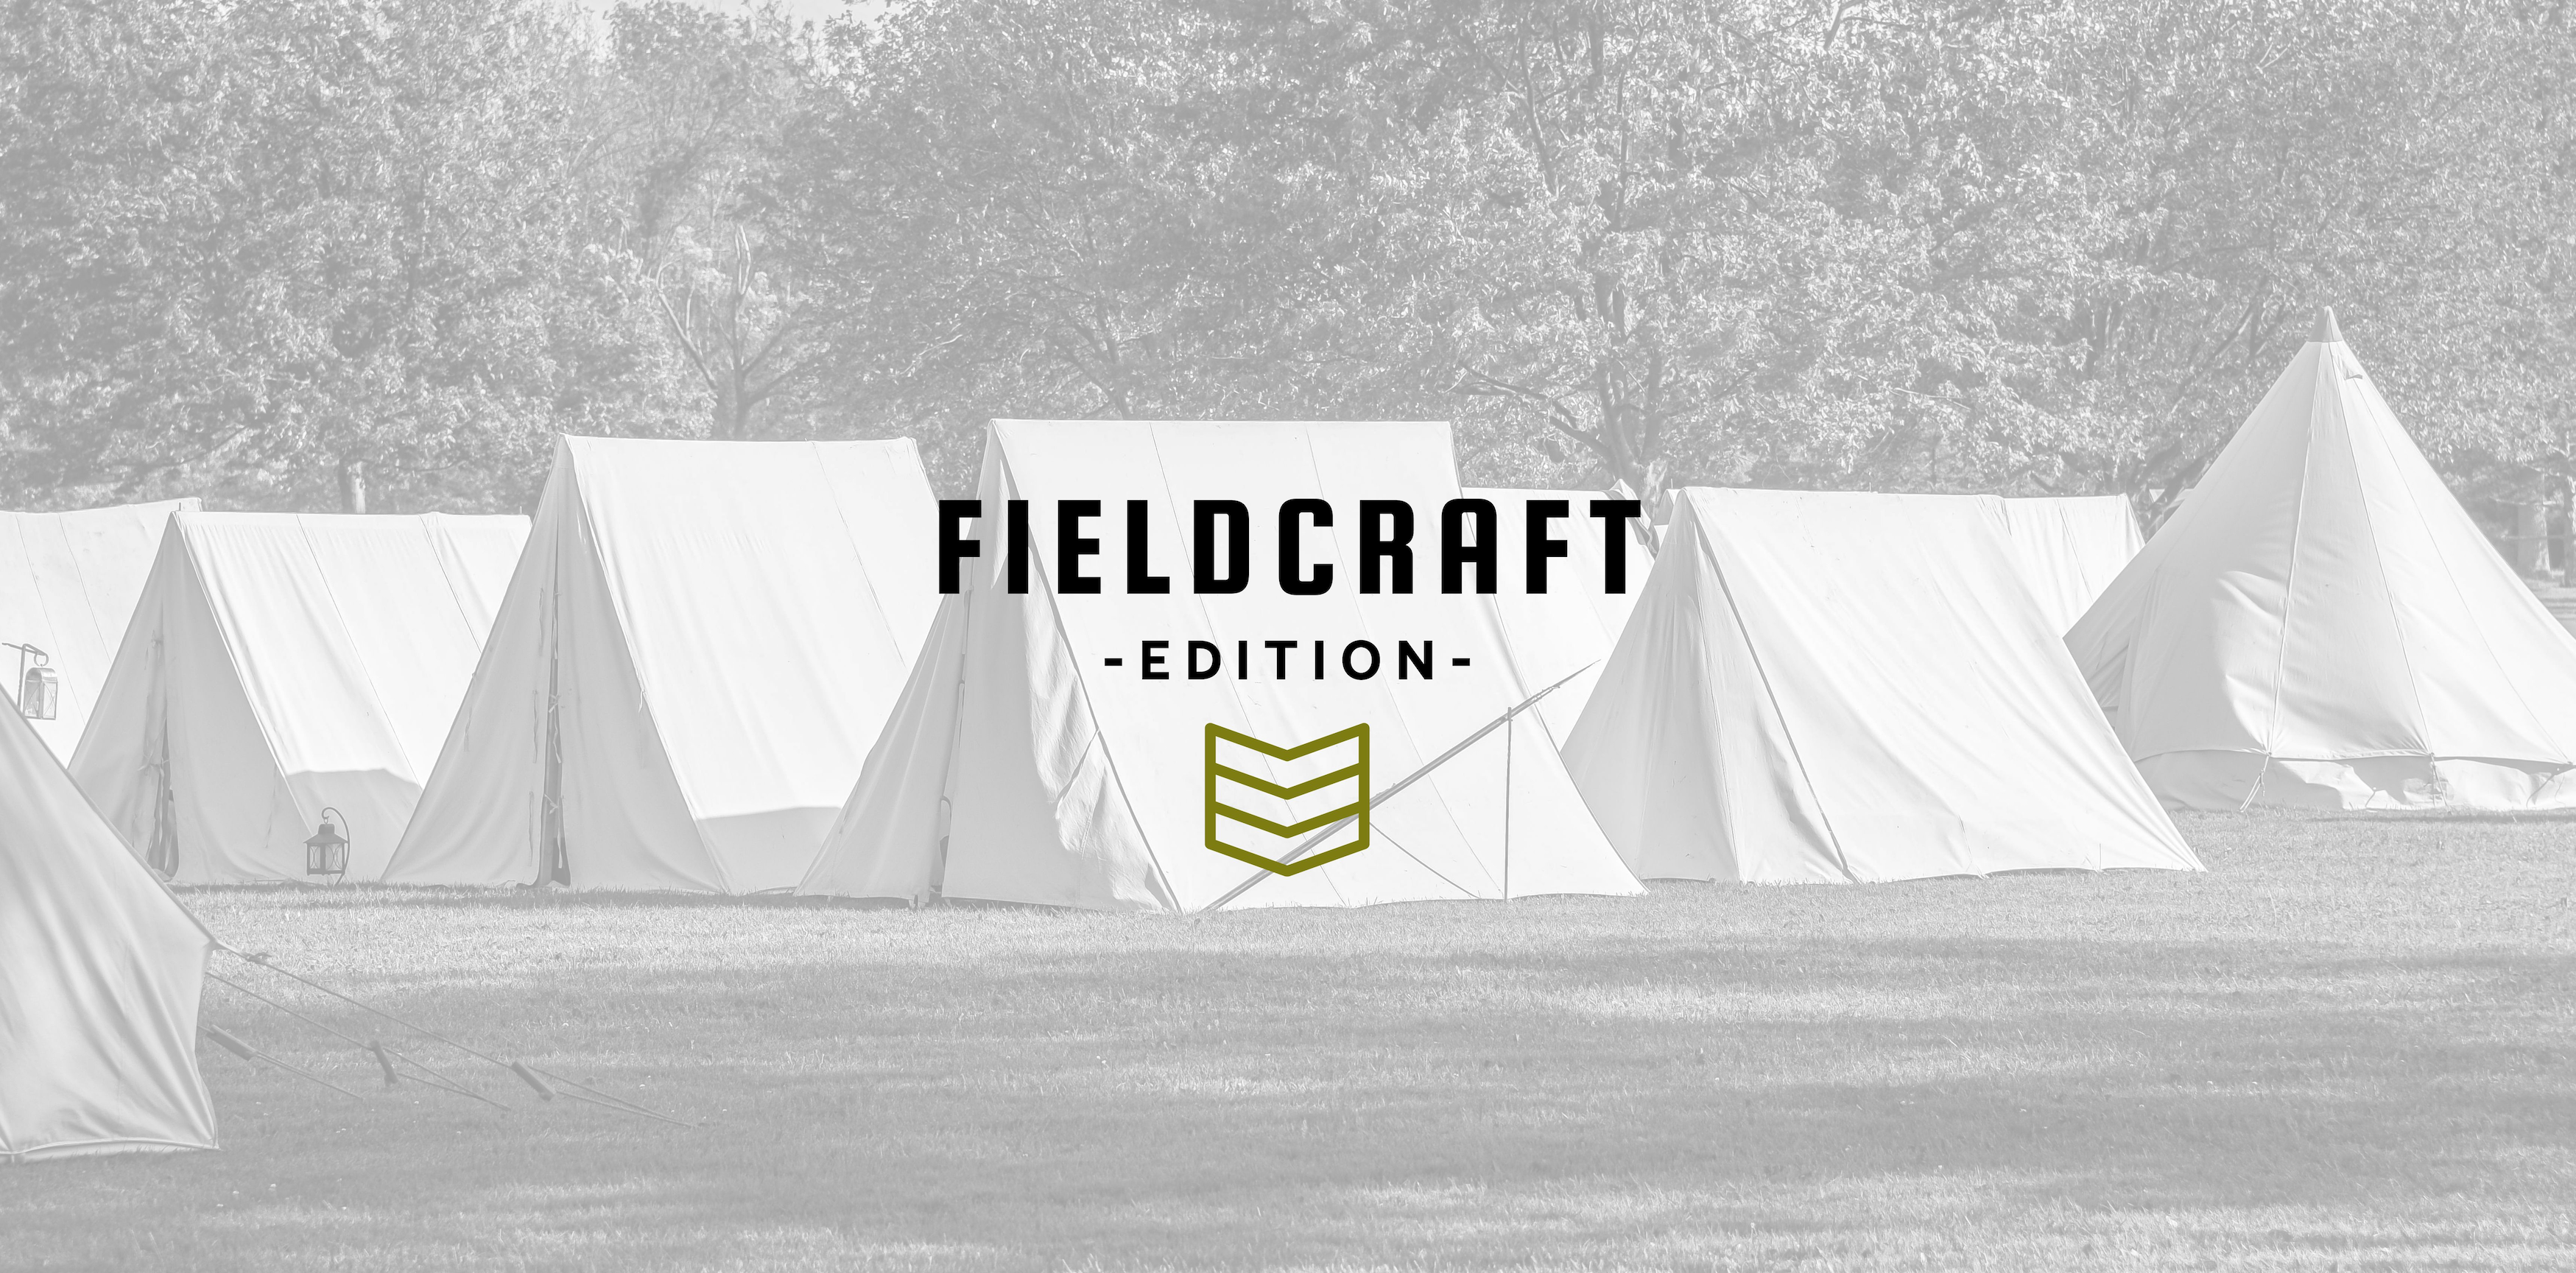 Fieldcraft | The Newest Edition to our Everyday Carry